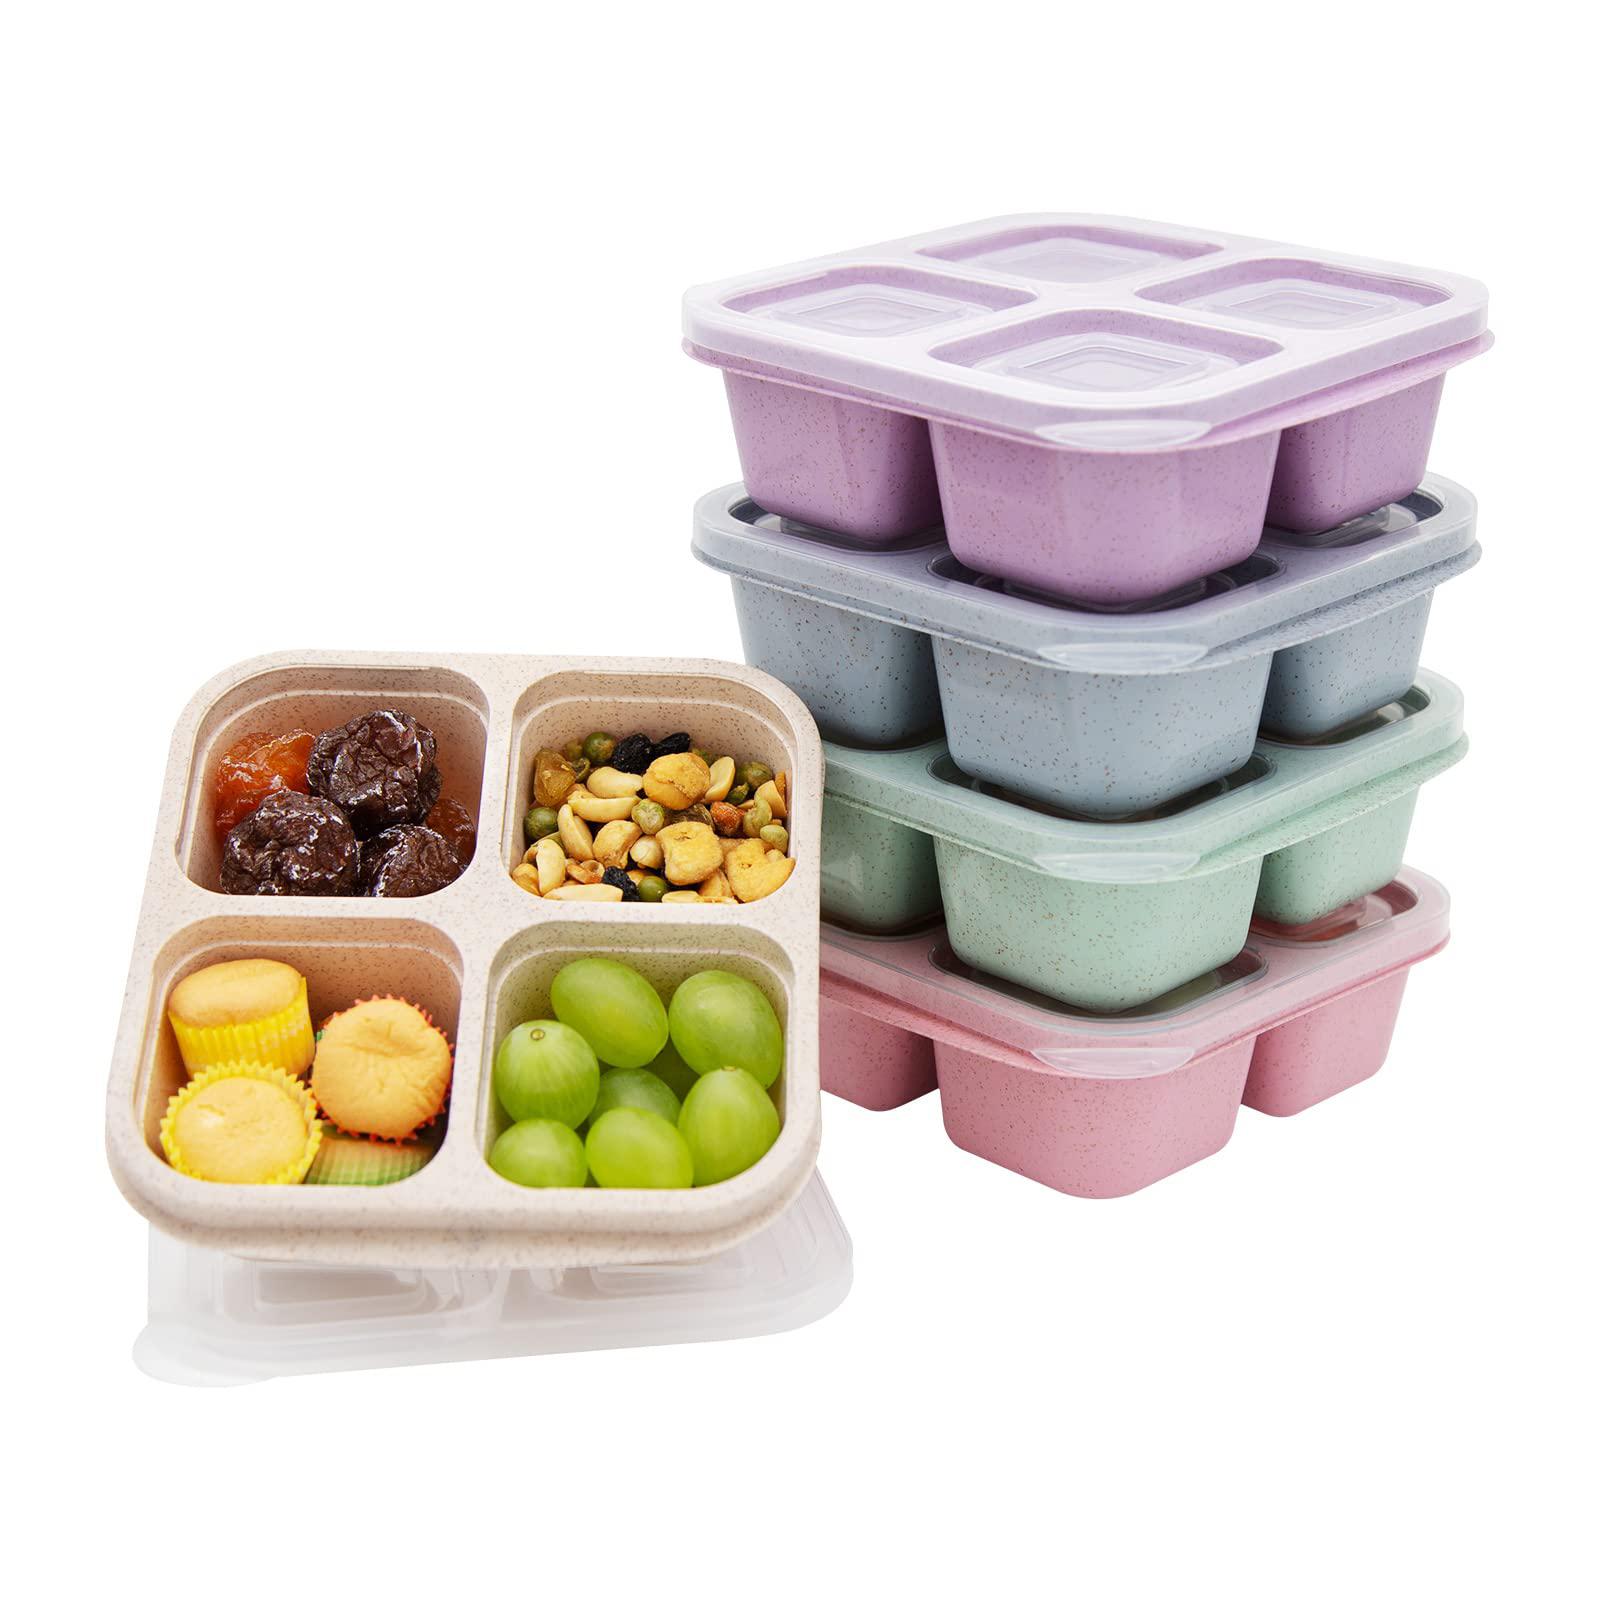 Bento Lunch Box for Kids (4 Pack), 4-Compartment Meal Prep Container with  Transparent Cover, Freezer and Dishwasher Safe Food Storage Containers